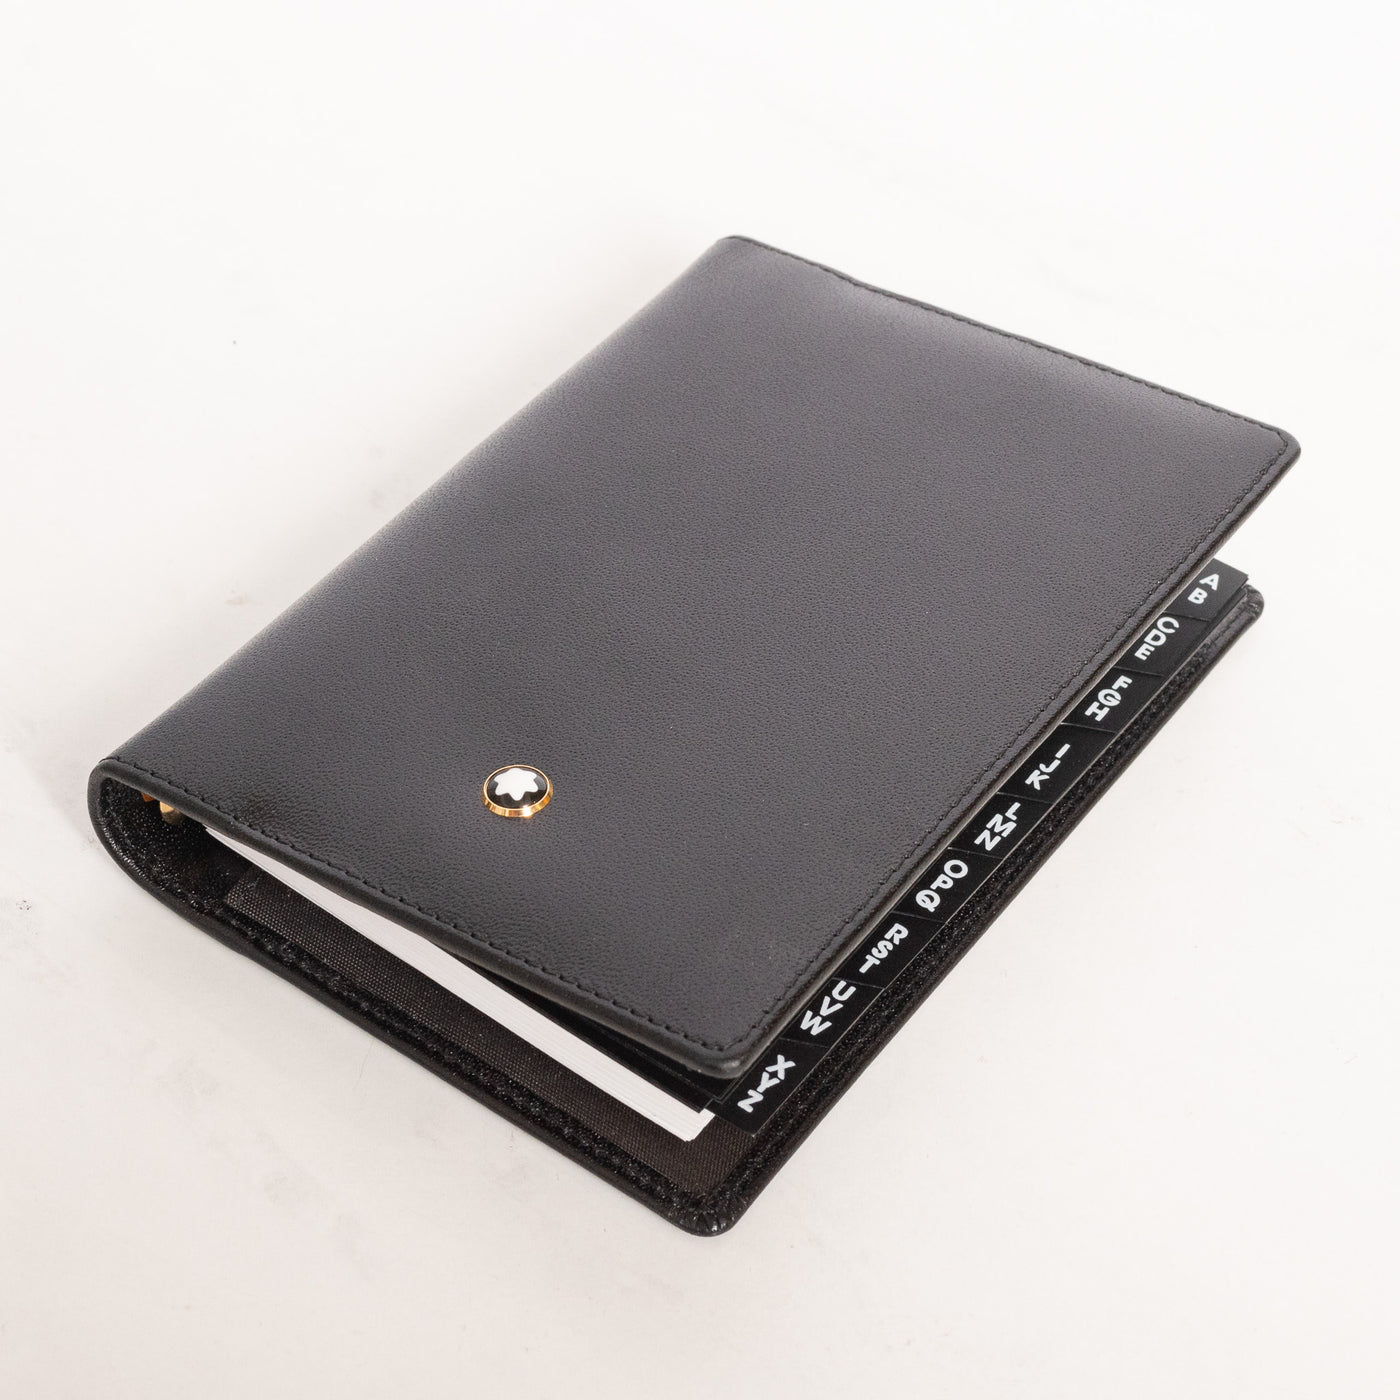 Montblanc Leather Goods Meisterstuck Black Leather Pocket Address Book 3425 - Preowned Closed Front